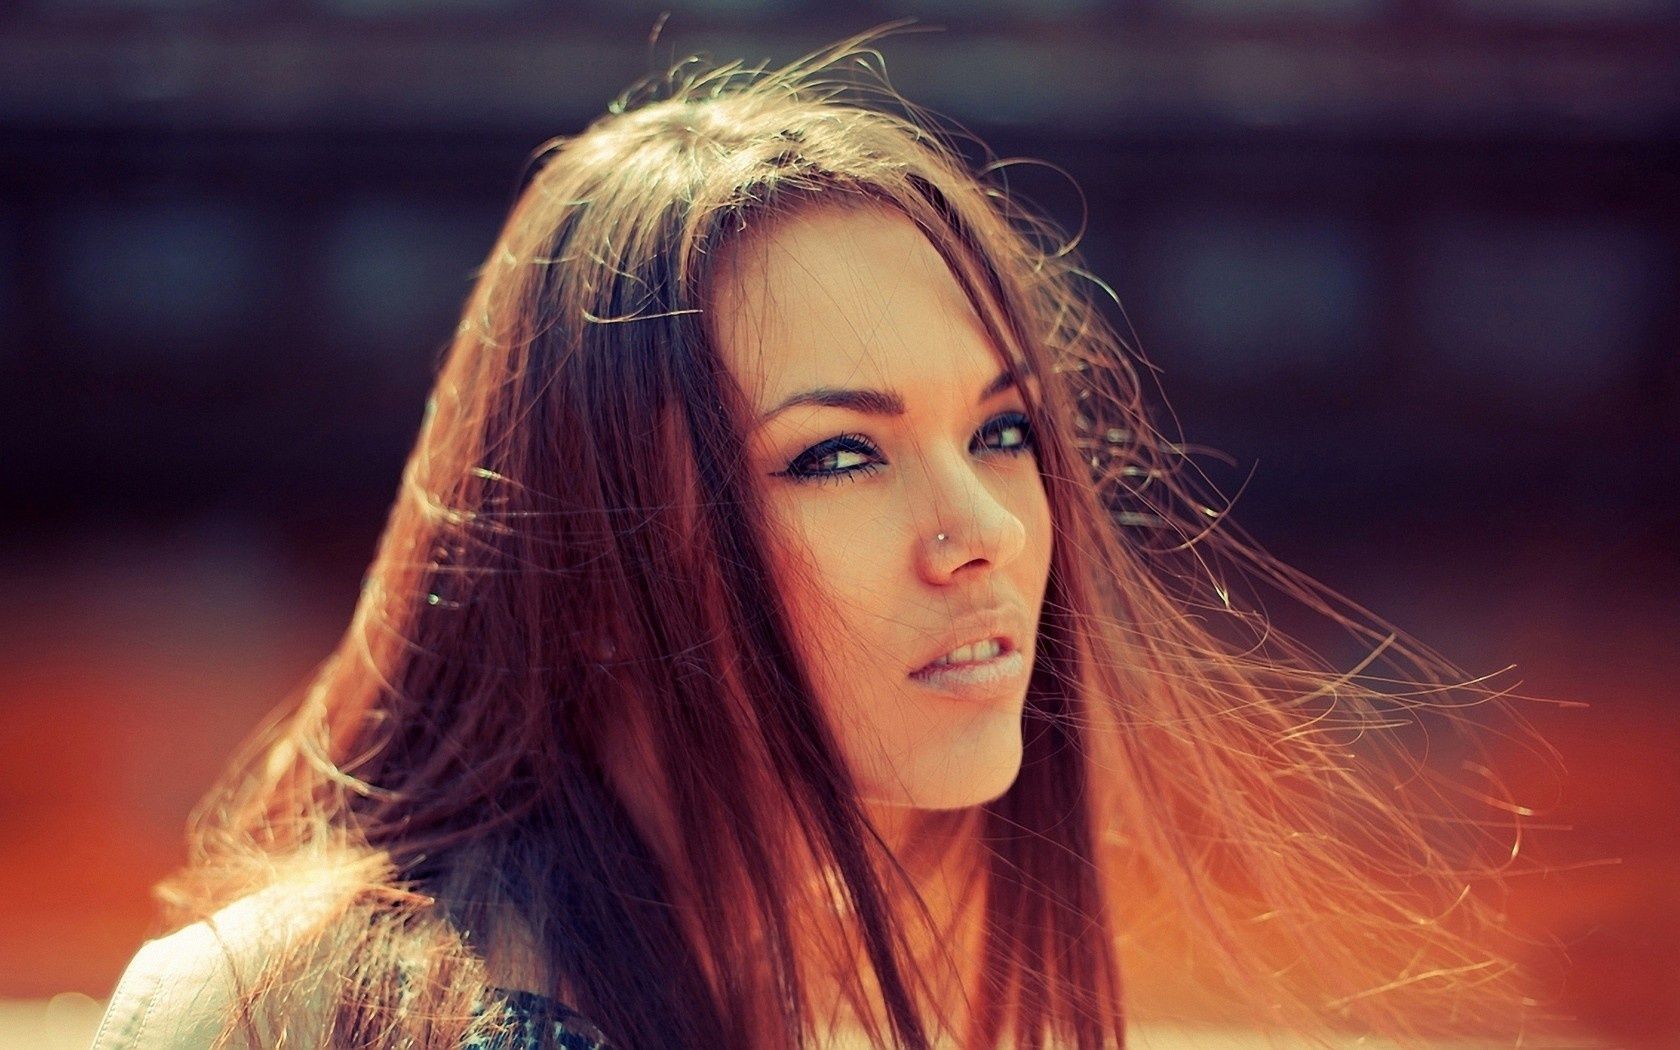 A woman with long hair and brown eyes - Danish